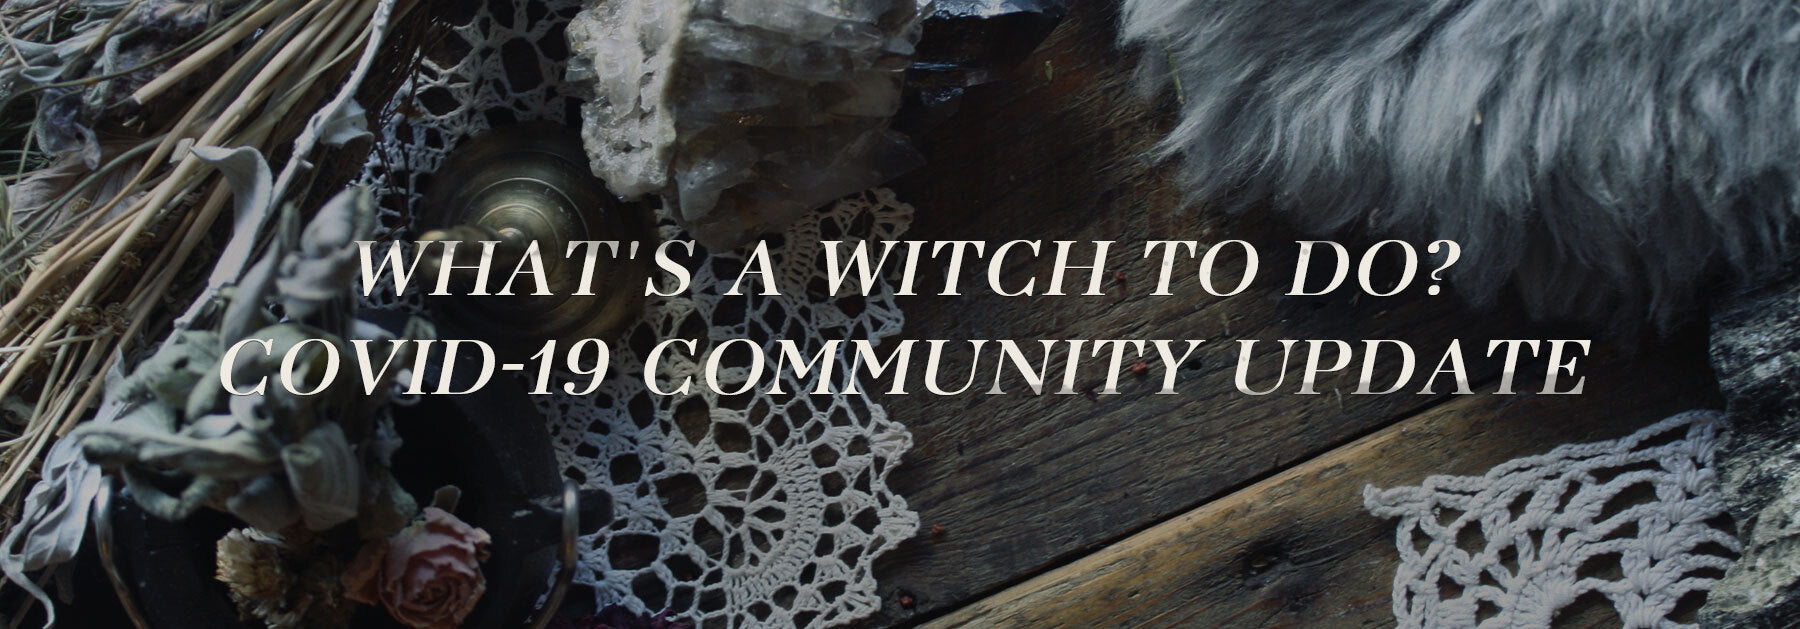 What's a Witch to Do? Covid-19 Community Update